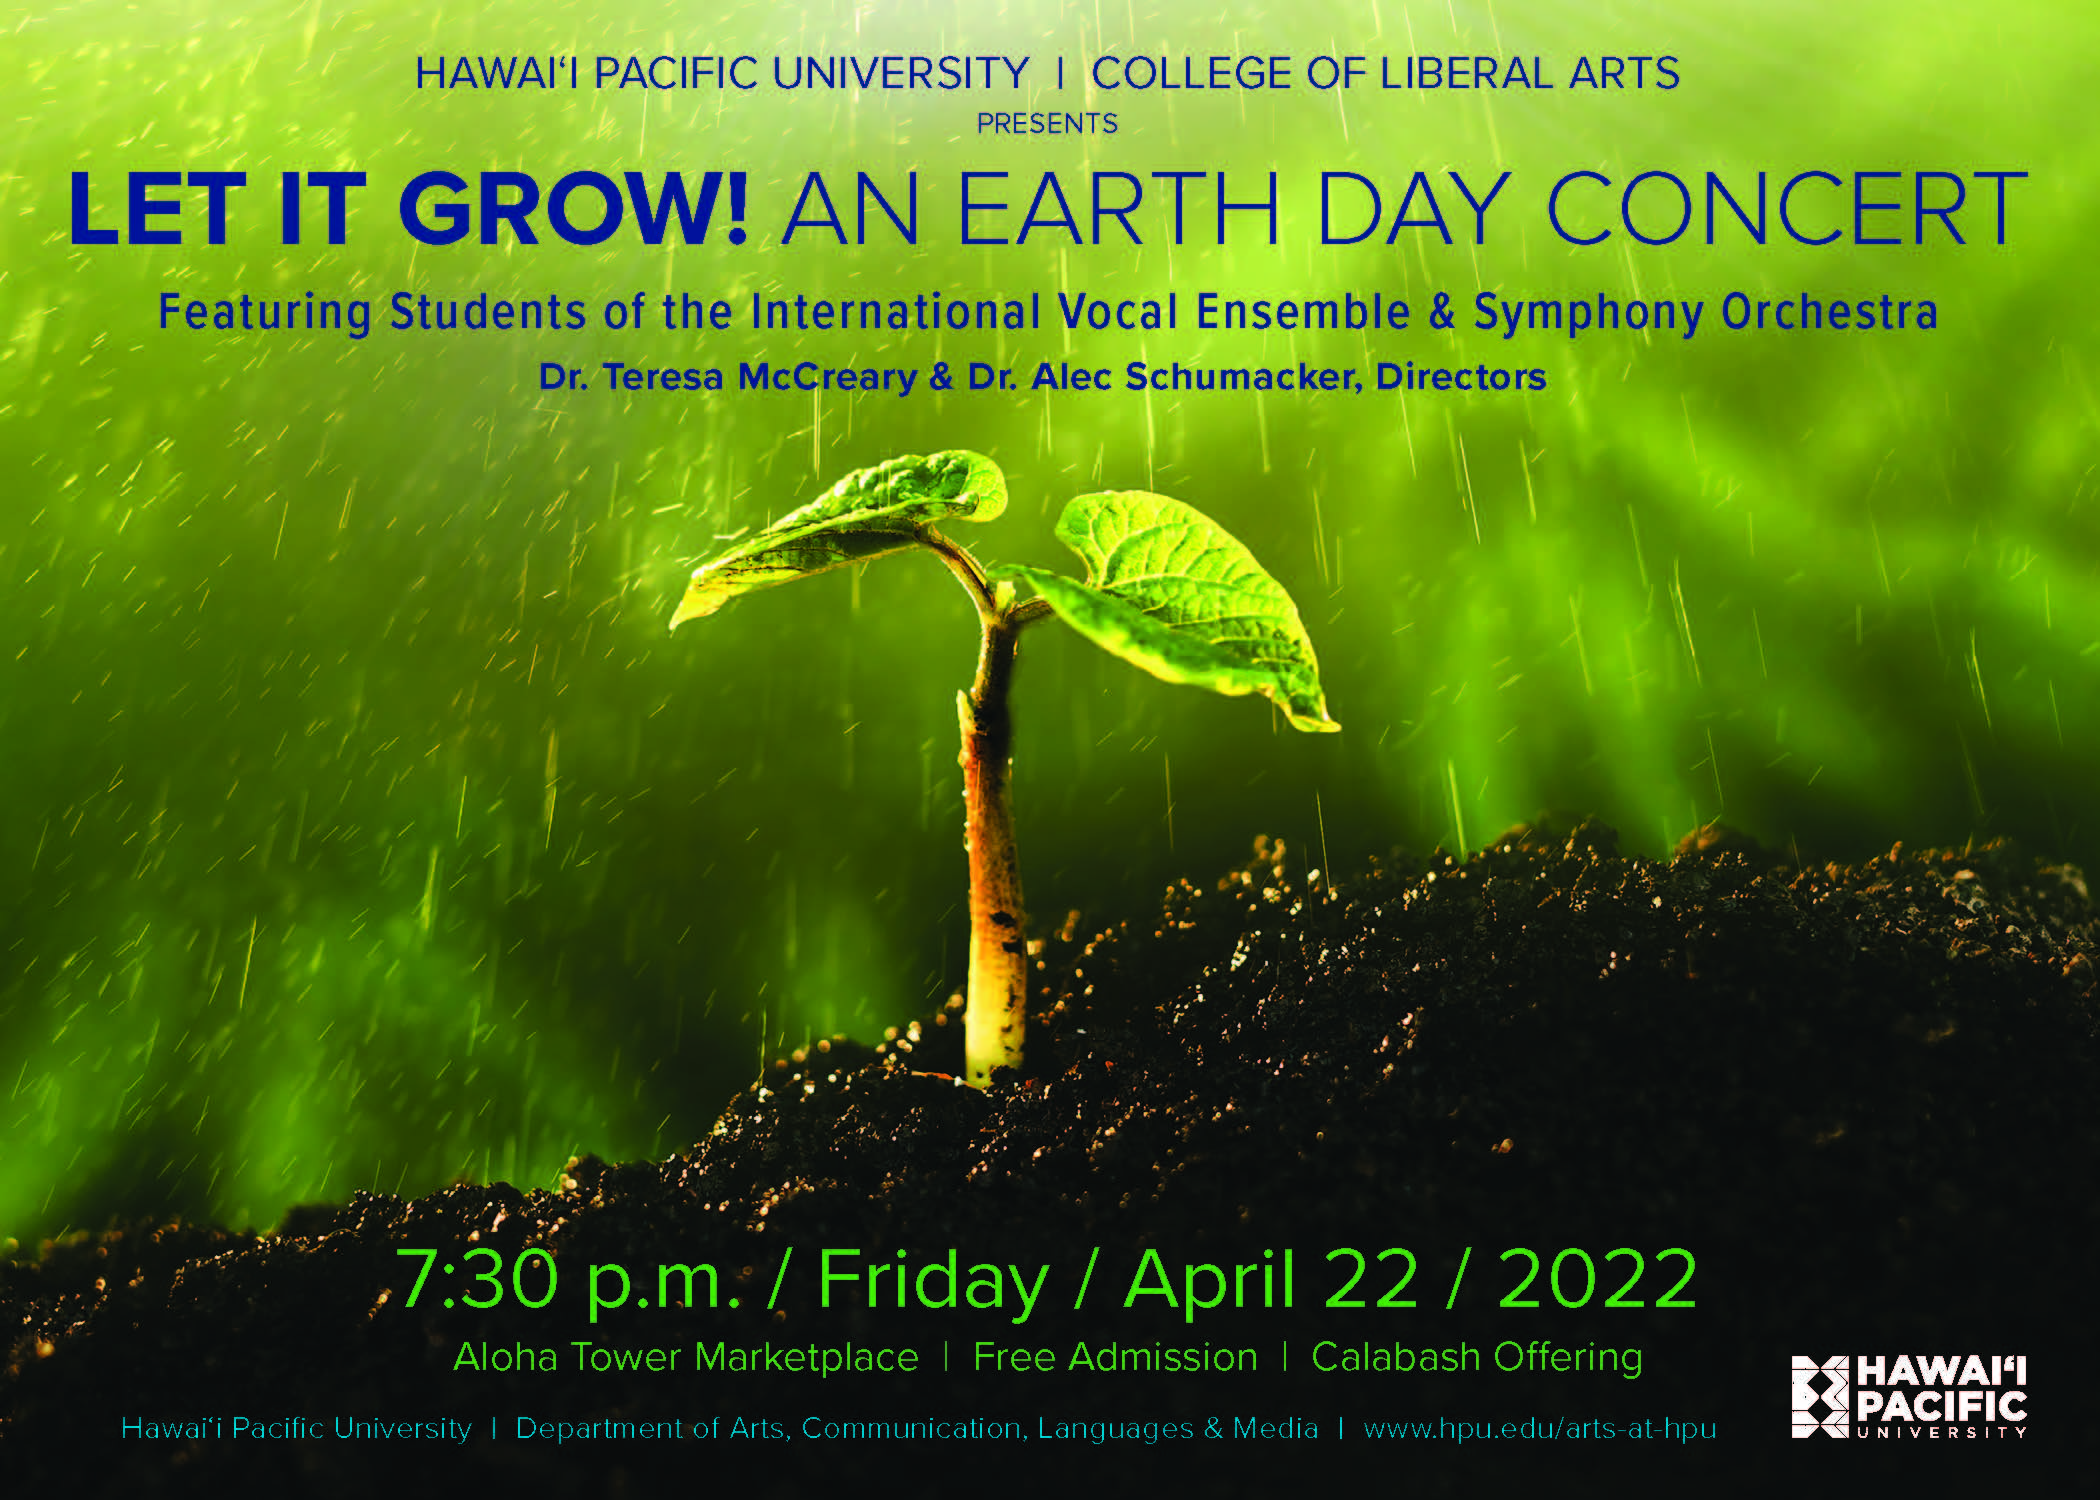 concert poster with image of seedling 